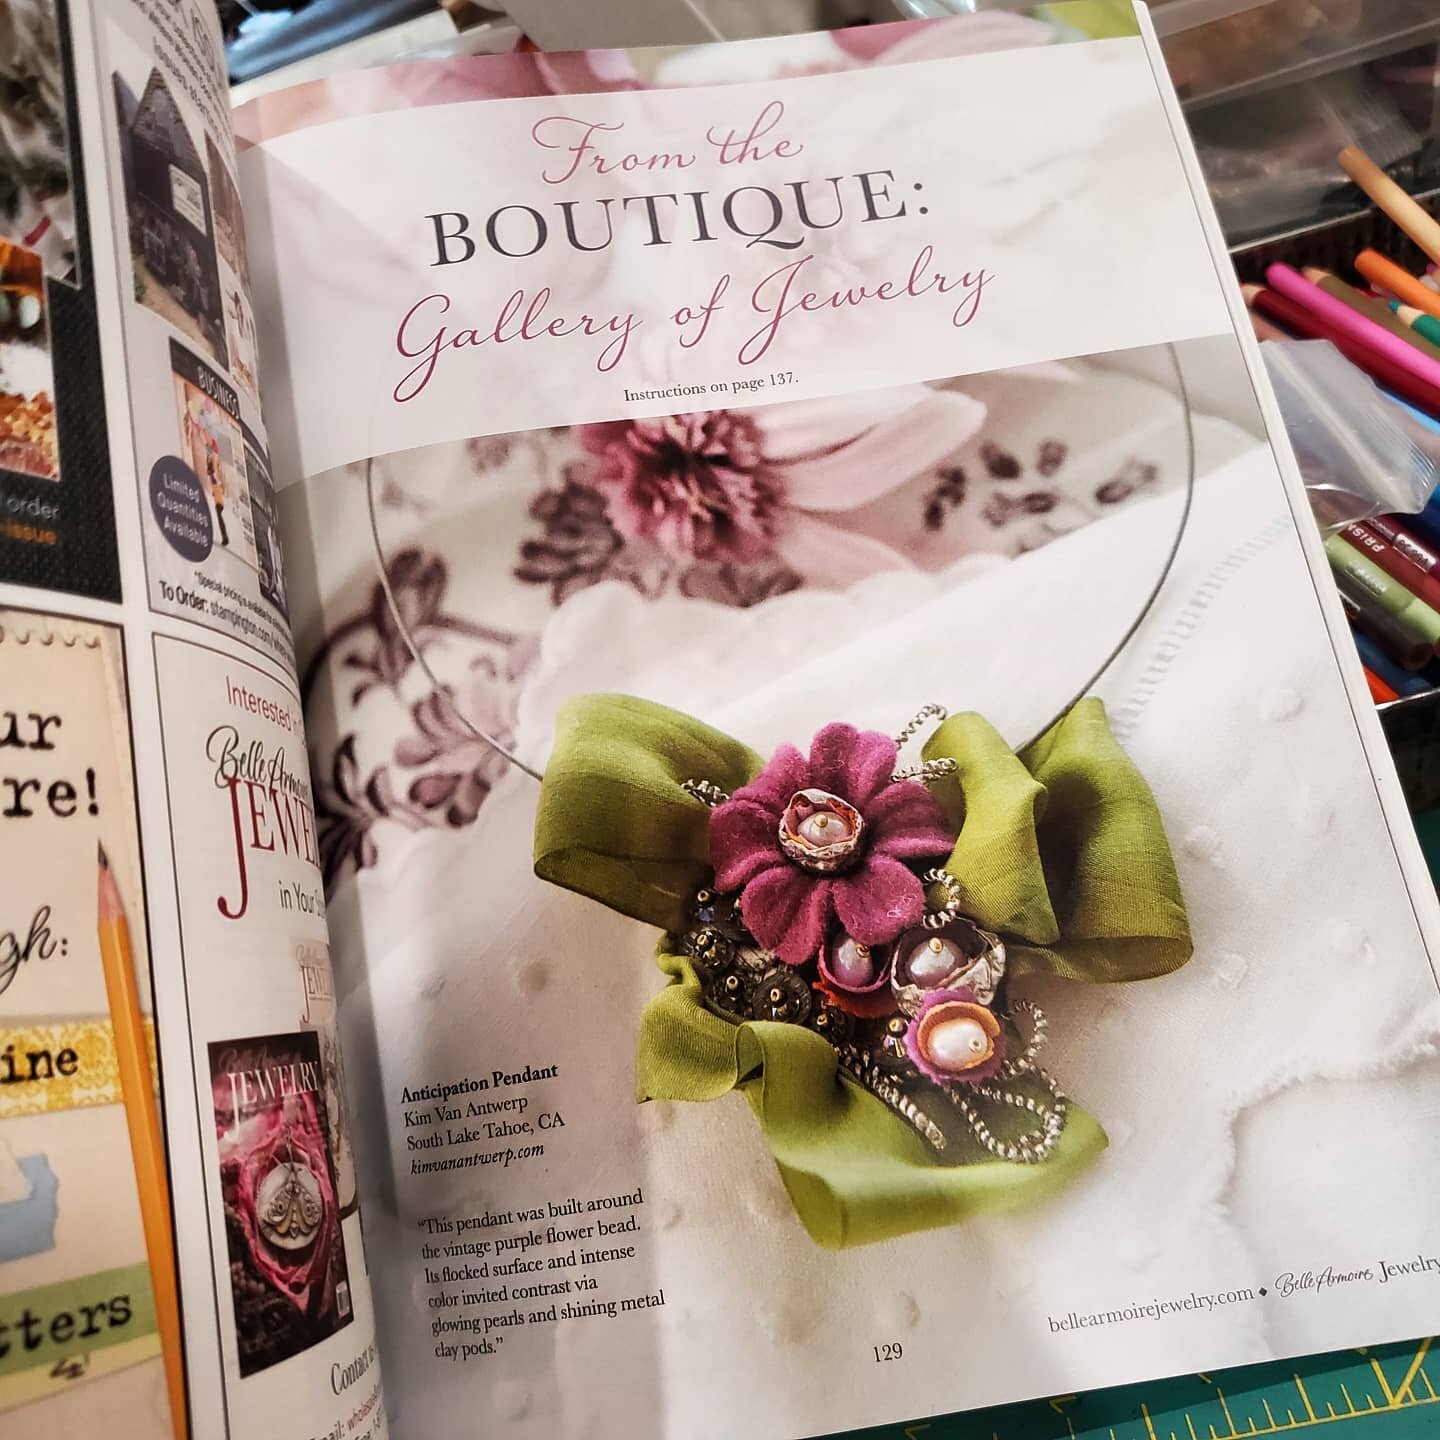 How nice! I got the front page of the Boutique section in the new #bellearmoirejewelry magazine. Thank you very much @stampington it looks lovely.

#parisvintage #parisfleamarket #frenchvintagestyle #vintagebeads #handmadejewelry #makingjewelry #mixe